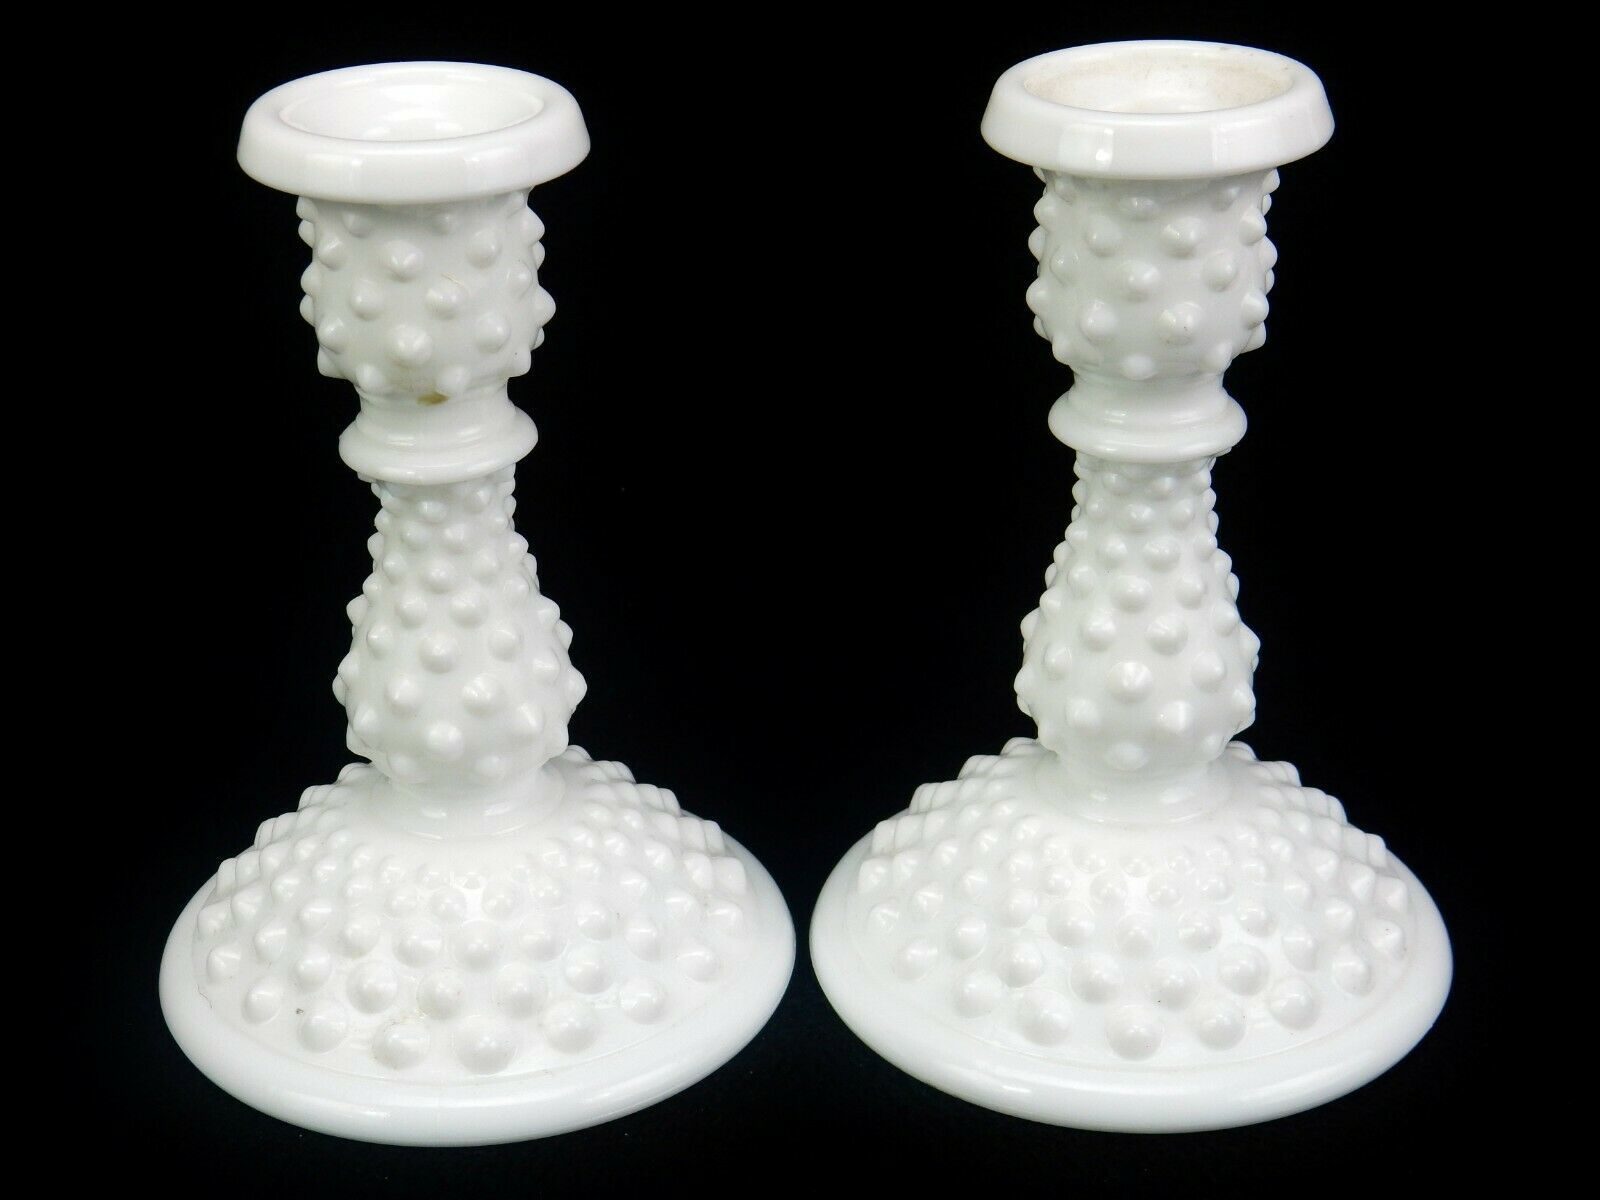 Primary image for Pair of Vintage Fenton Taper Candle Holders, White Milk Glass, Hobnail Pattern